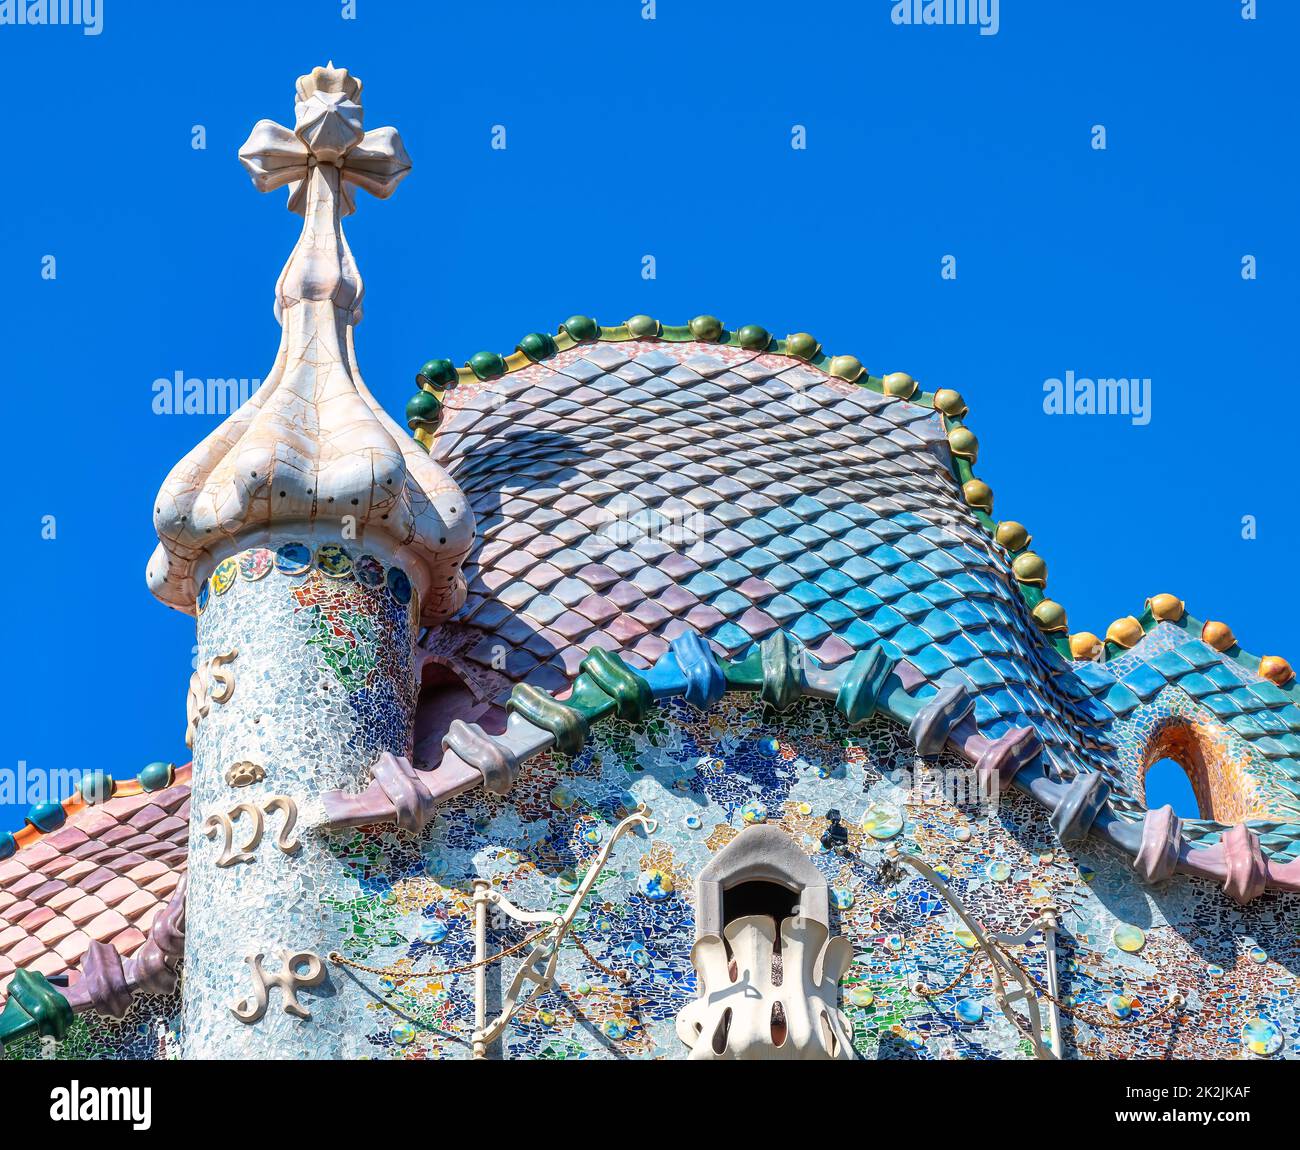 Casa Batllo. Exterior architecture feature. Designed by Antoni Gaudi, the place is a landmark in the city. Stock Photo